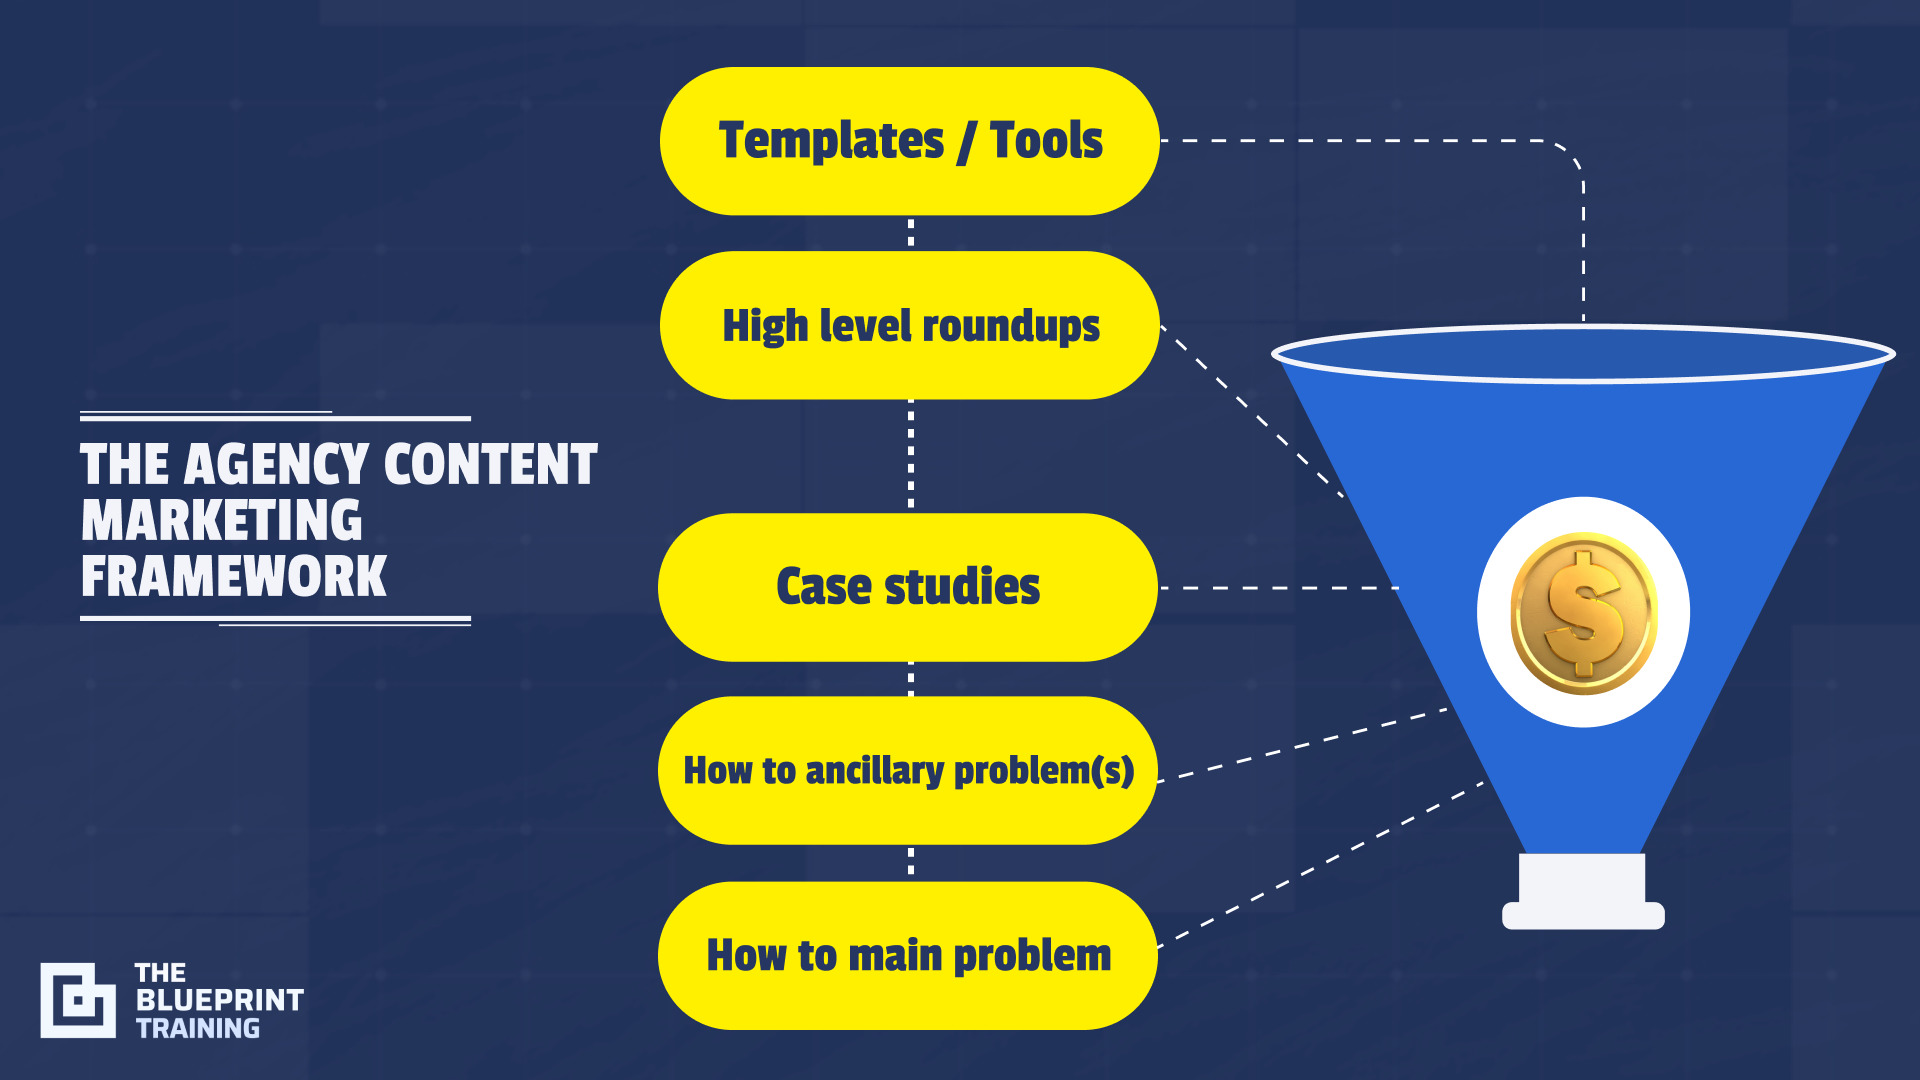 THE AGENCY CONTENT MARKETING FRAMEWORK